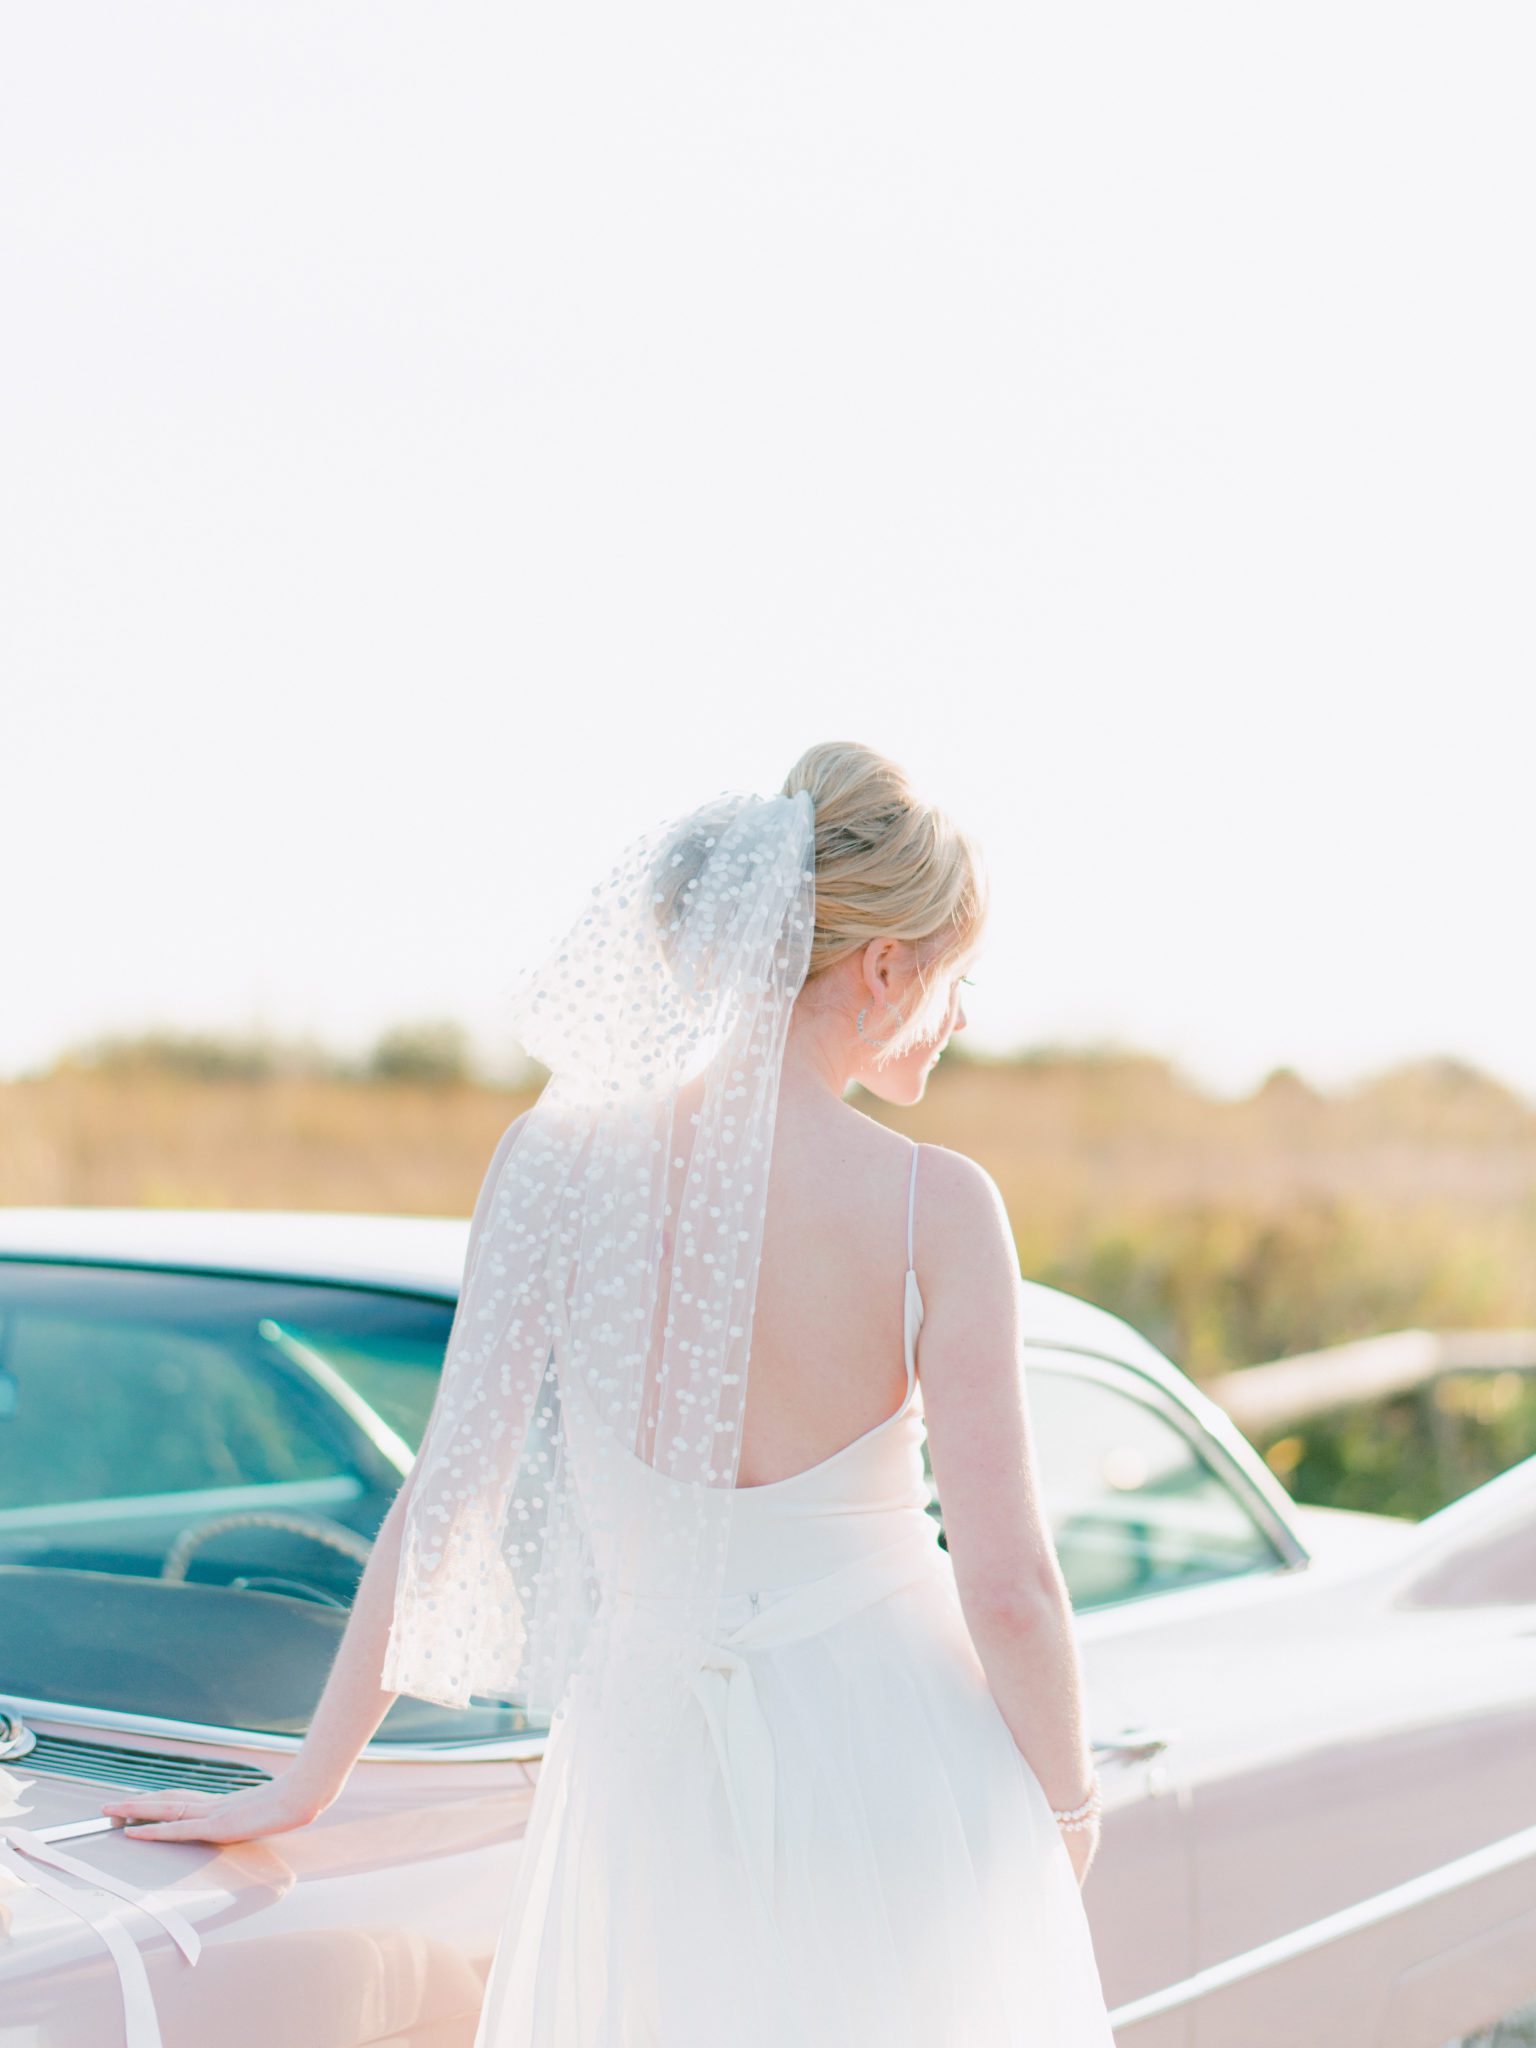 Retro pink Cadillac bridal session features polka dot veil and retro vibes